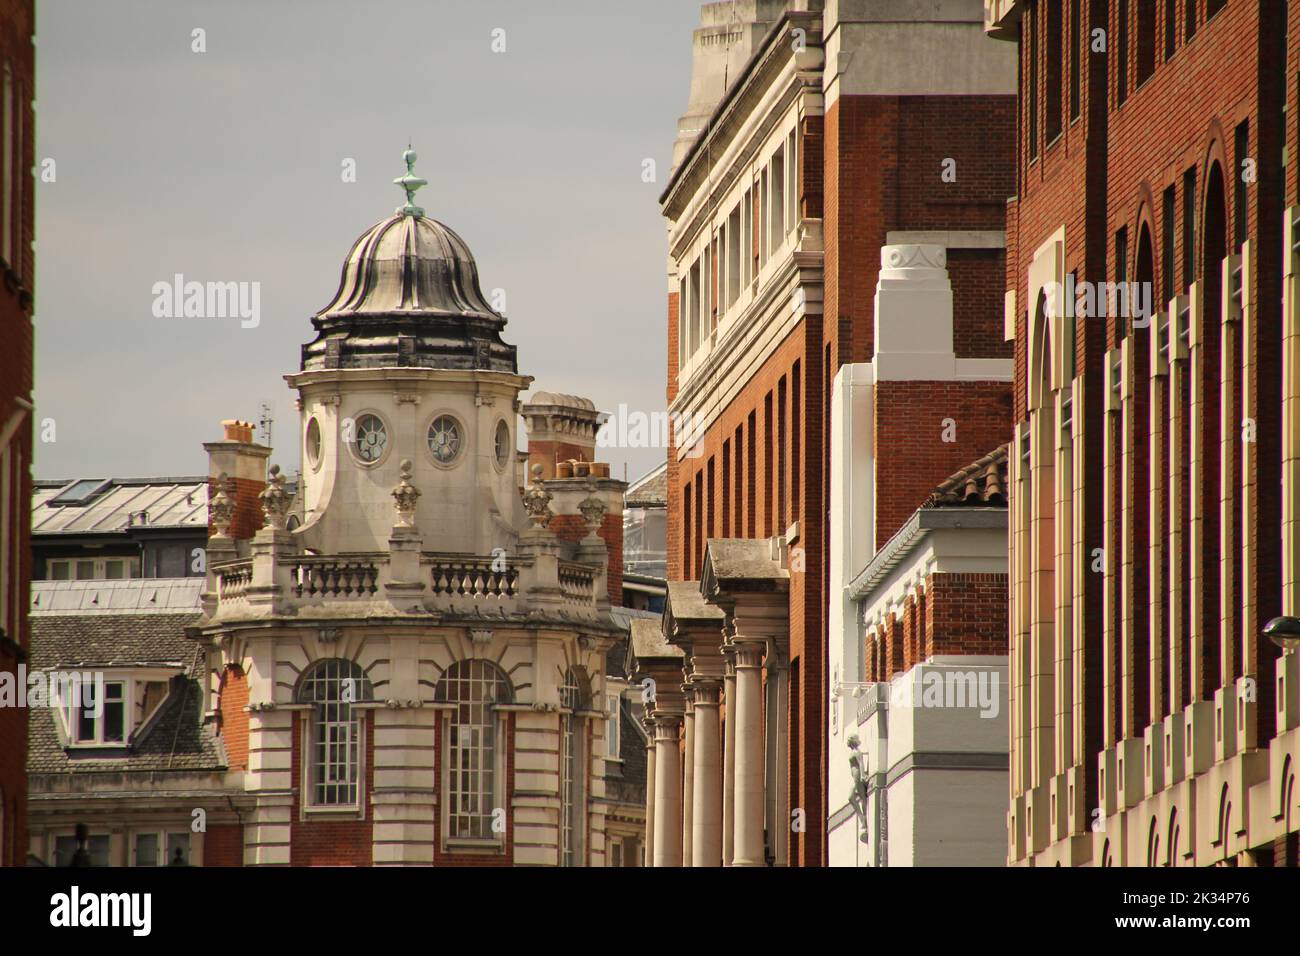 A London urban scenery with beautiful historic buildings Stock Photo